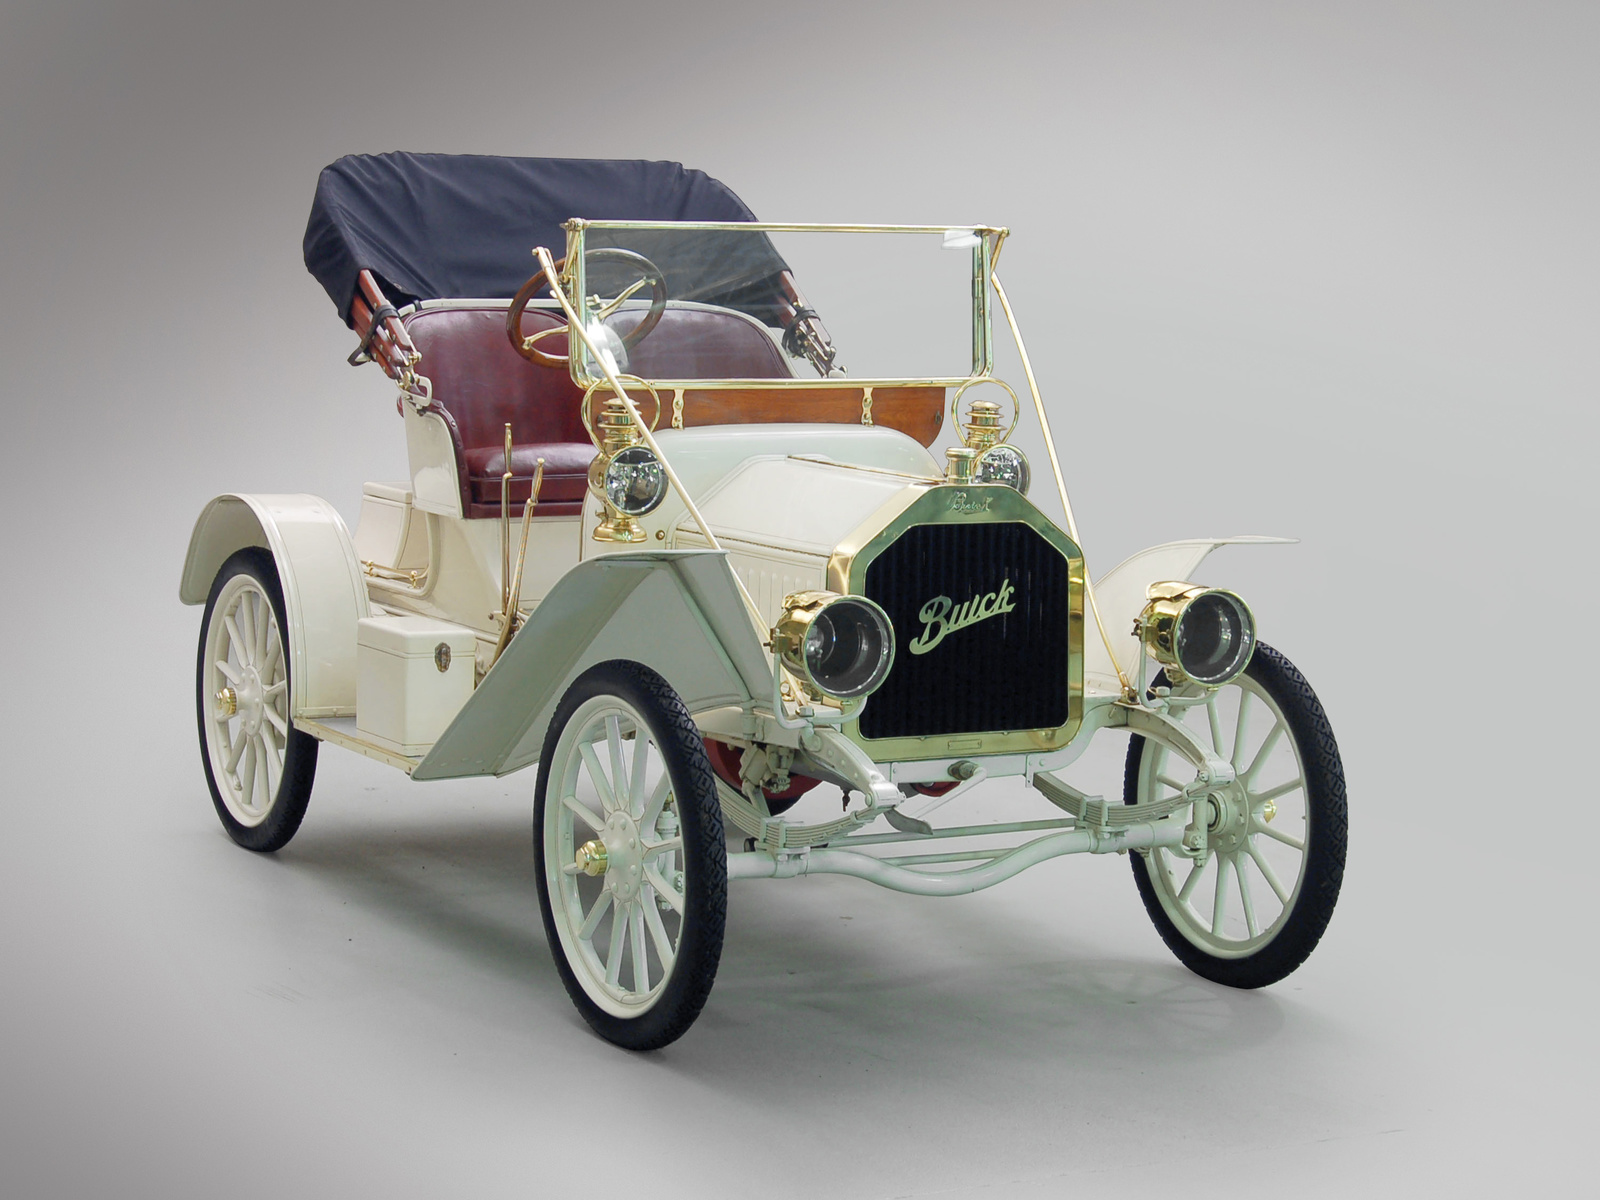 touring runabout, , model 10, 1908, , buick, 